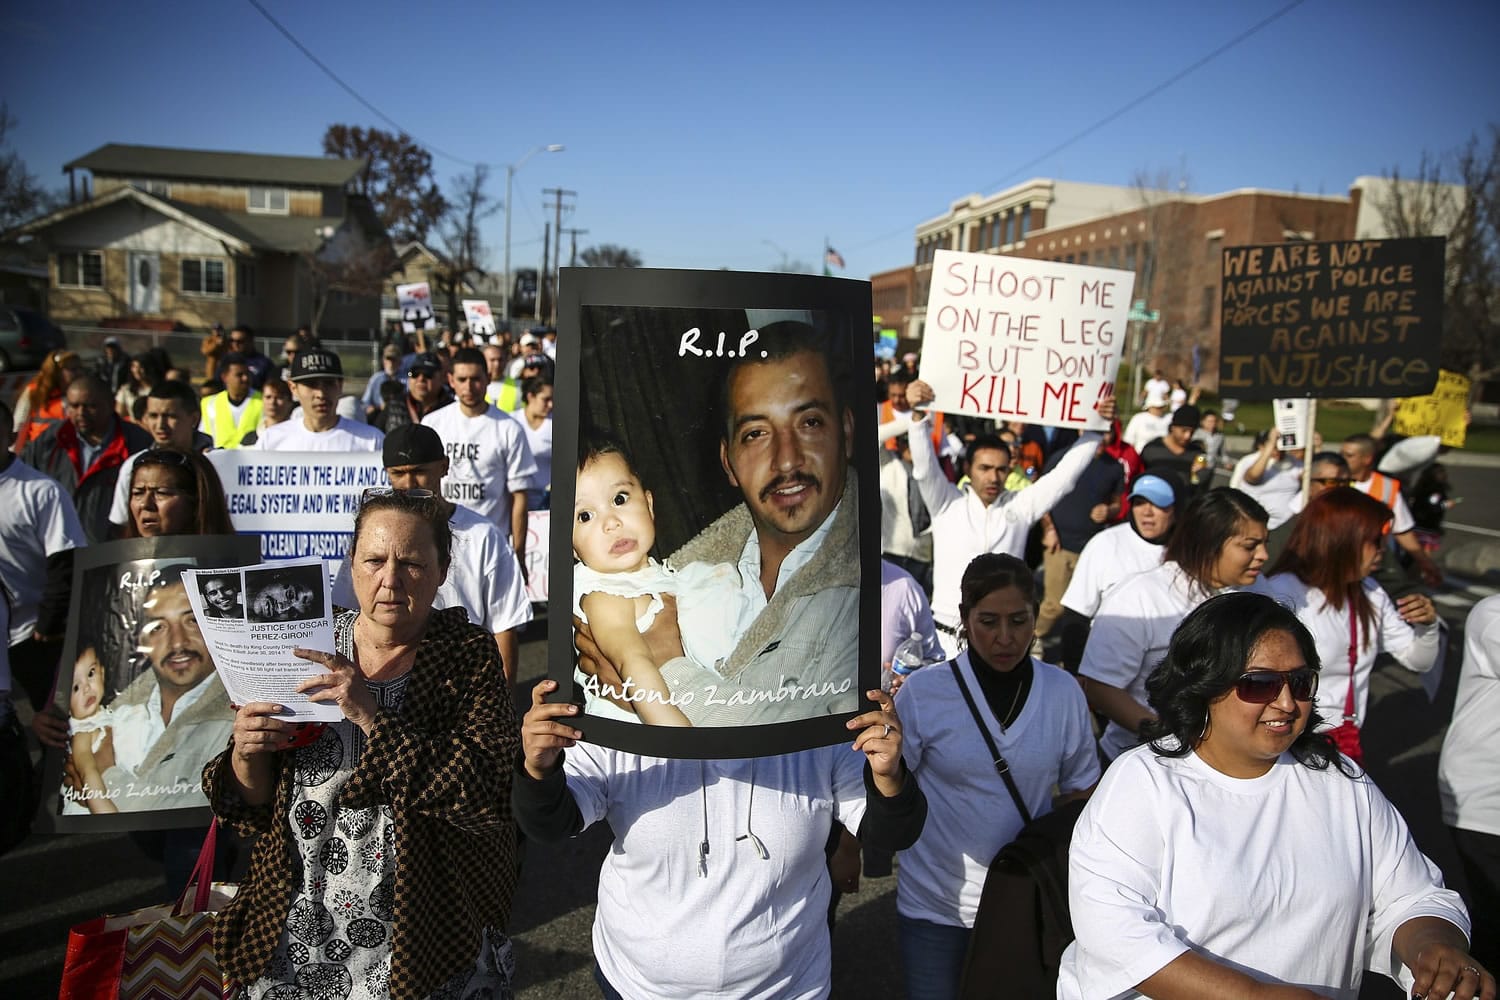 Marchers carry photos of police shooting victim Antonio Zambrano-Montes during a Feb. 14 rally in Pasco. The parents of Zambrano-Monte have filed a $4.76 million claim against the city of Pasco.